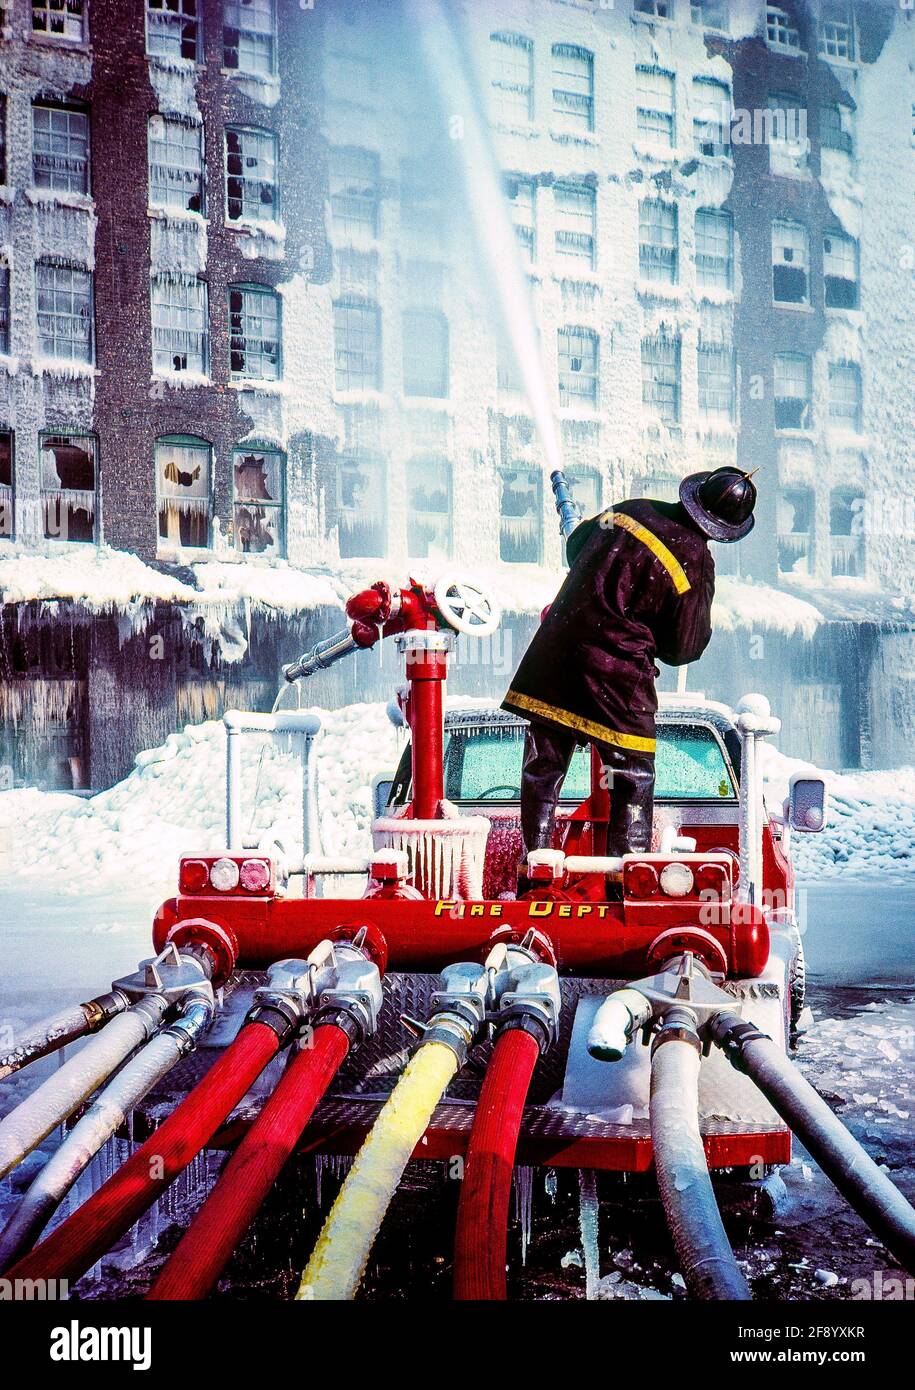 Firefighter in city in winter Stock Photo